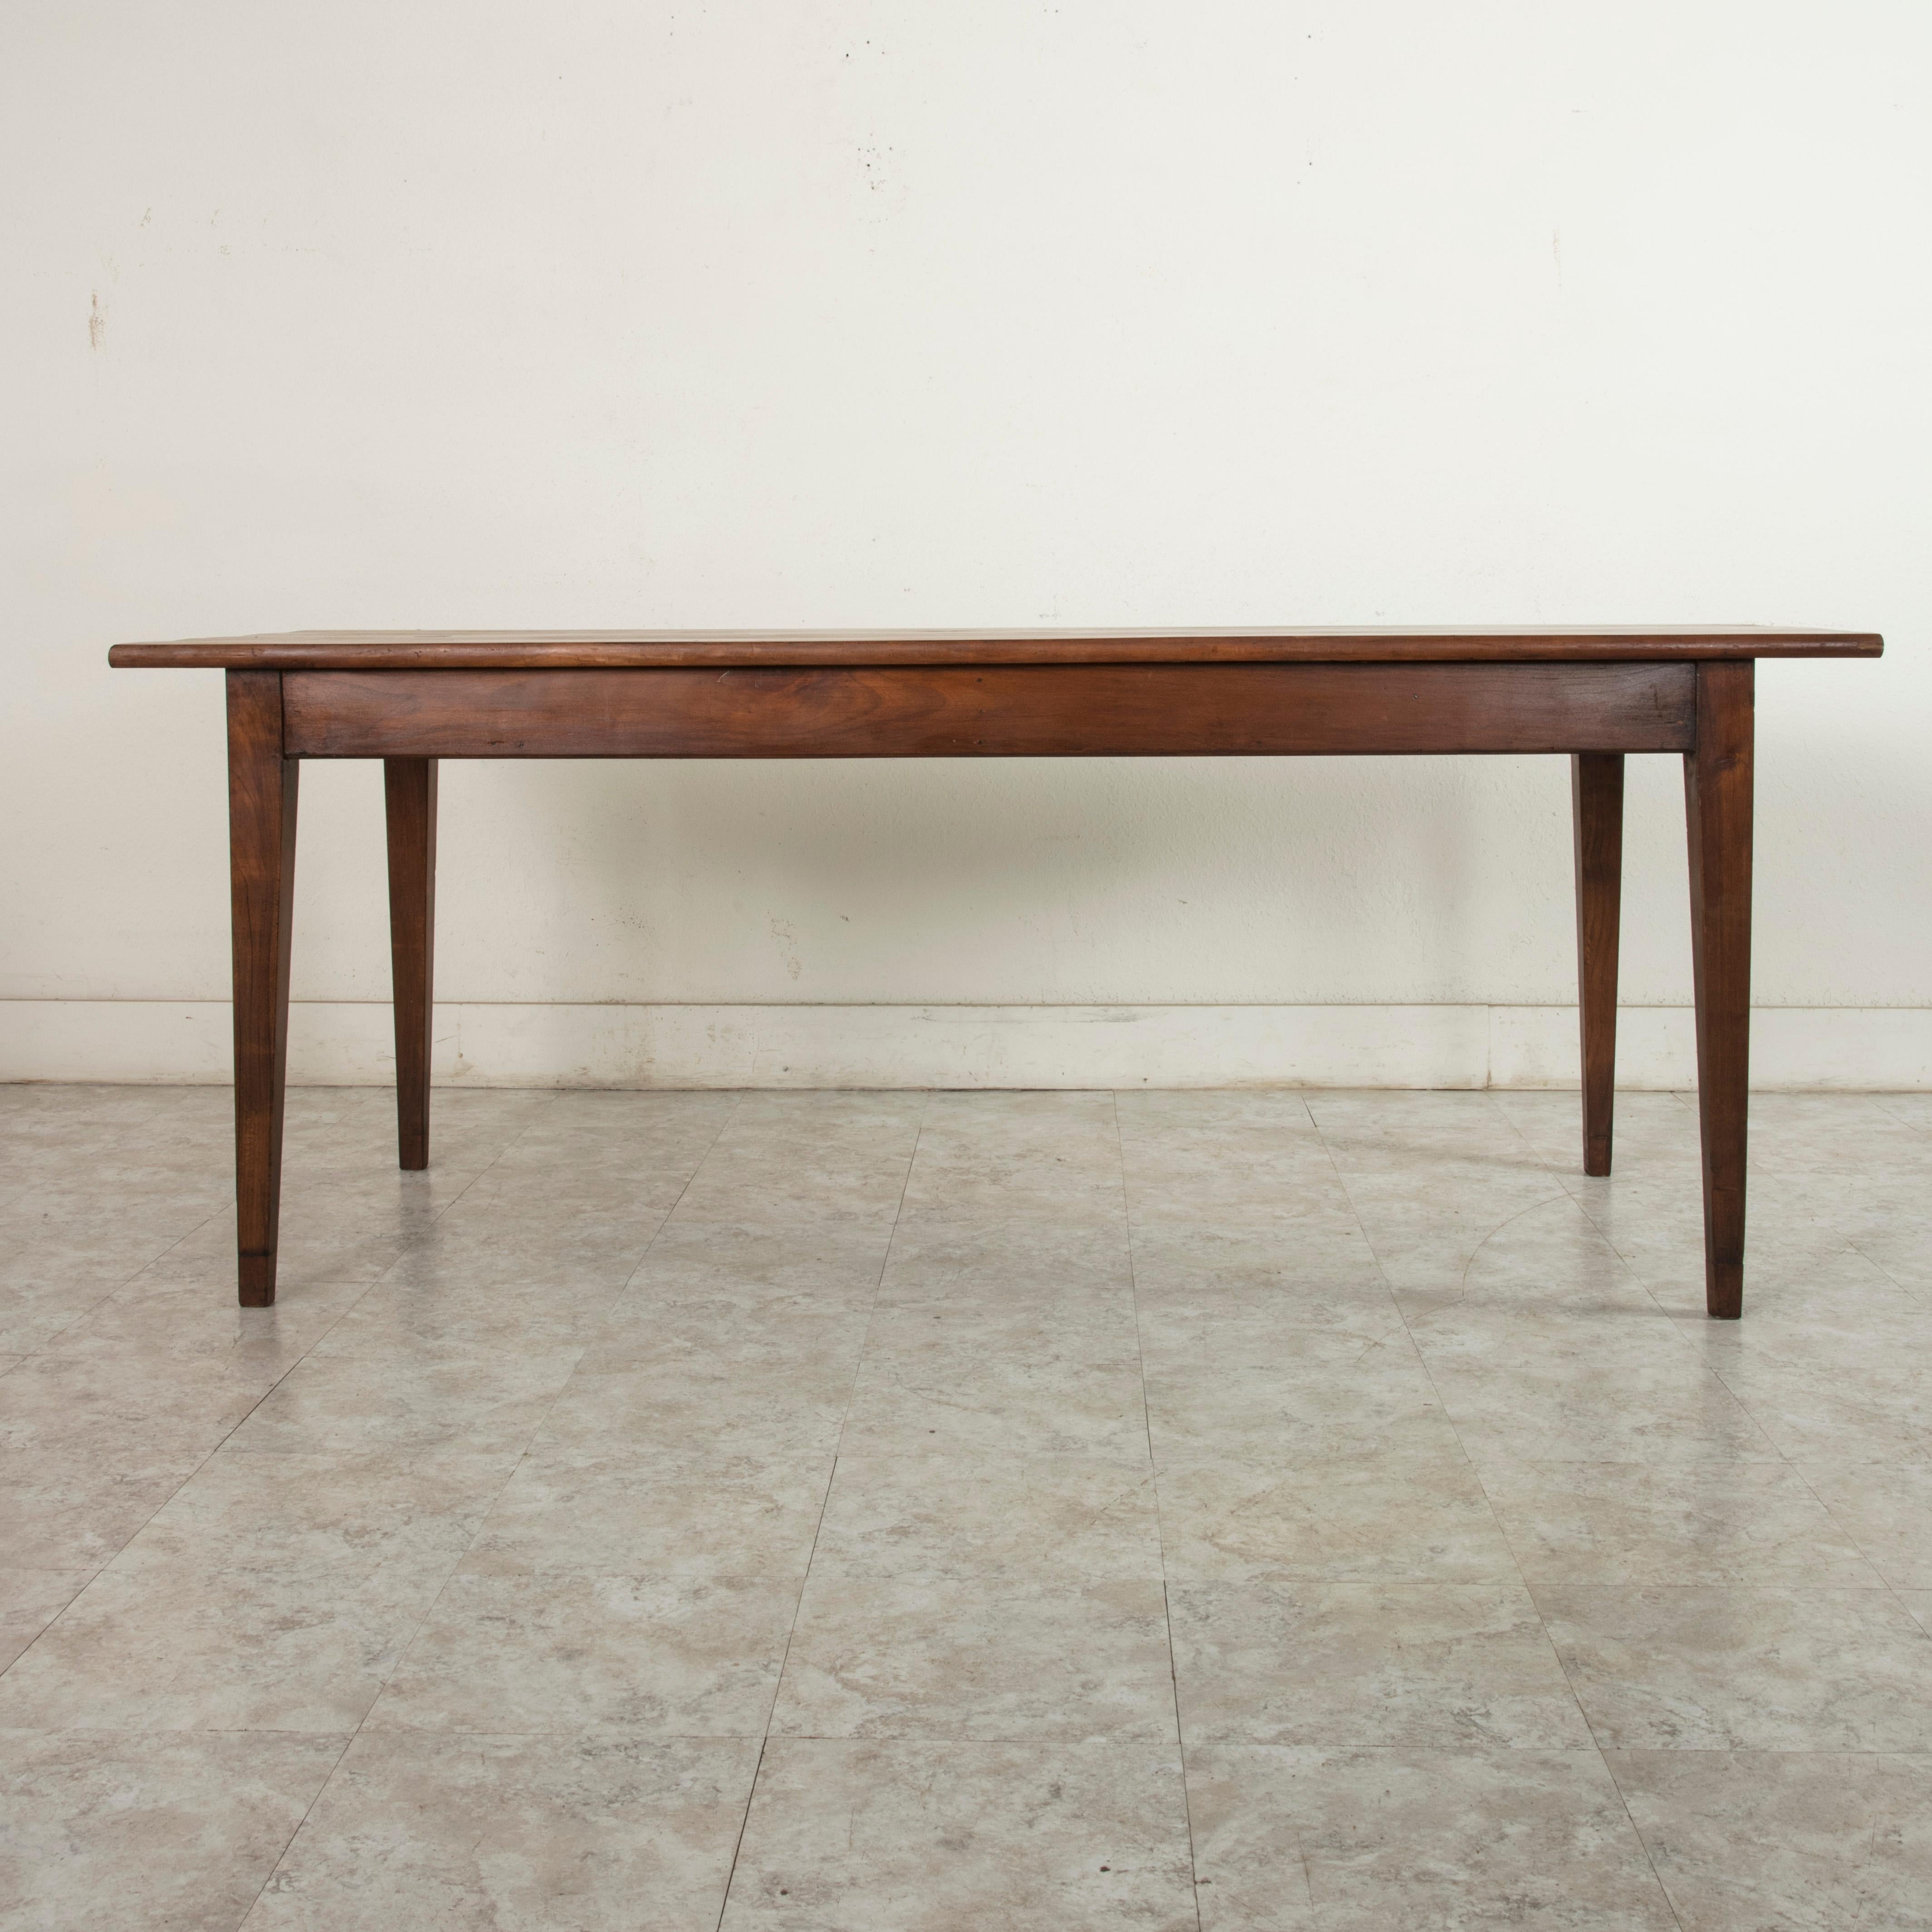 Early 20th Century French Cherrywood Farm Table Dining Table, Single Drawer, Cutting Board